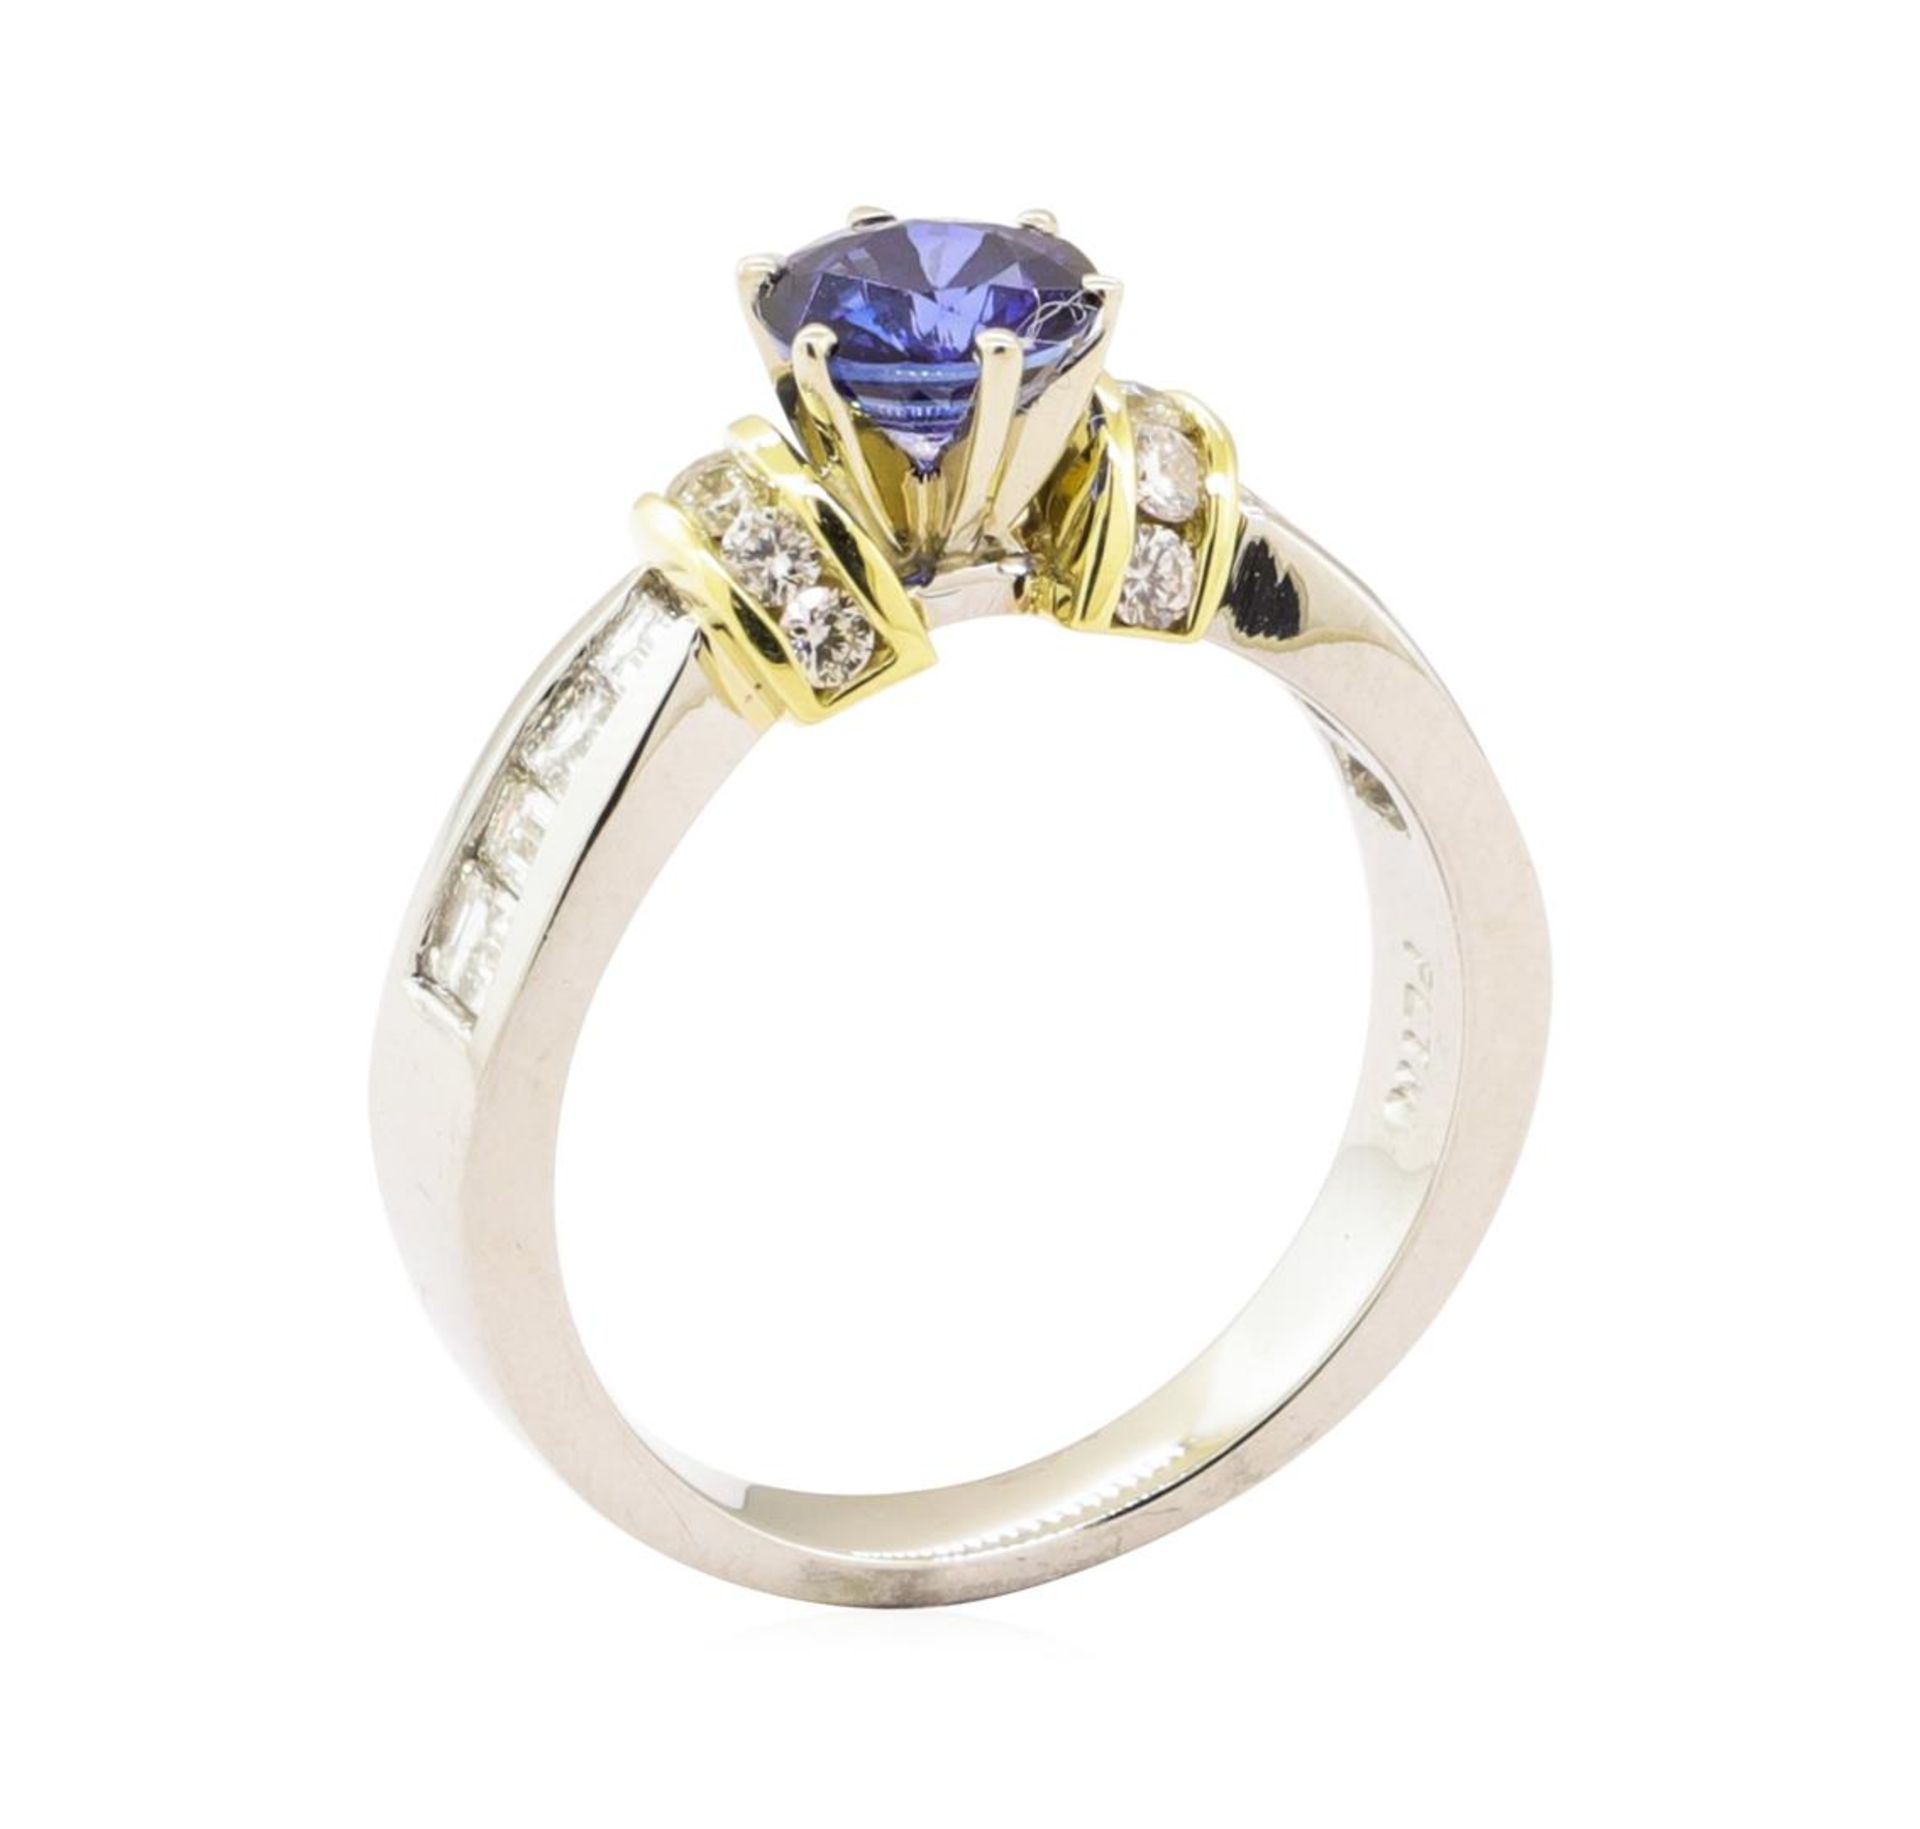 1.65 ctw Blue Sapphire And Diamond Ring - Platinum and 18KT Yellow Gold - Image 4 of 5